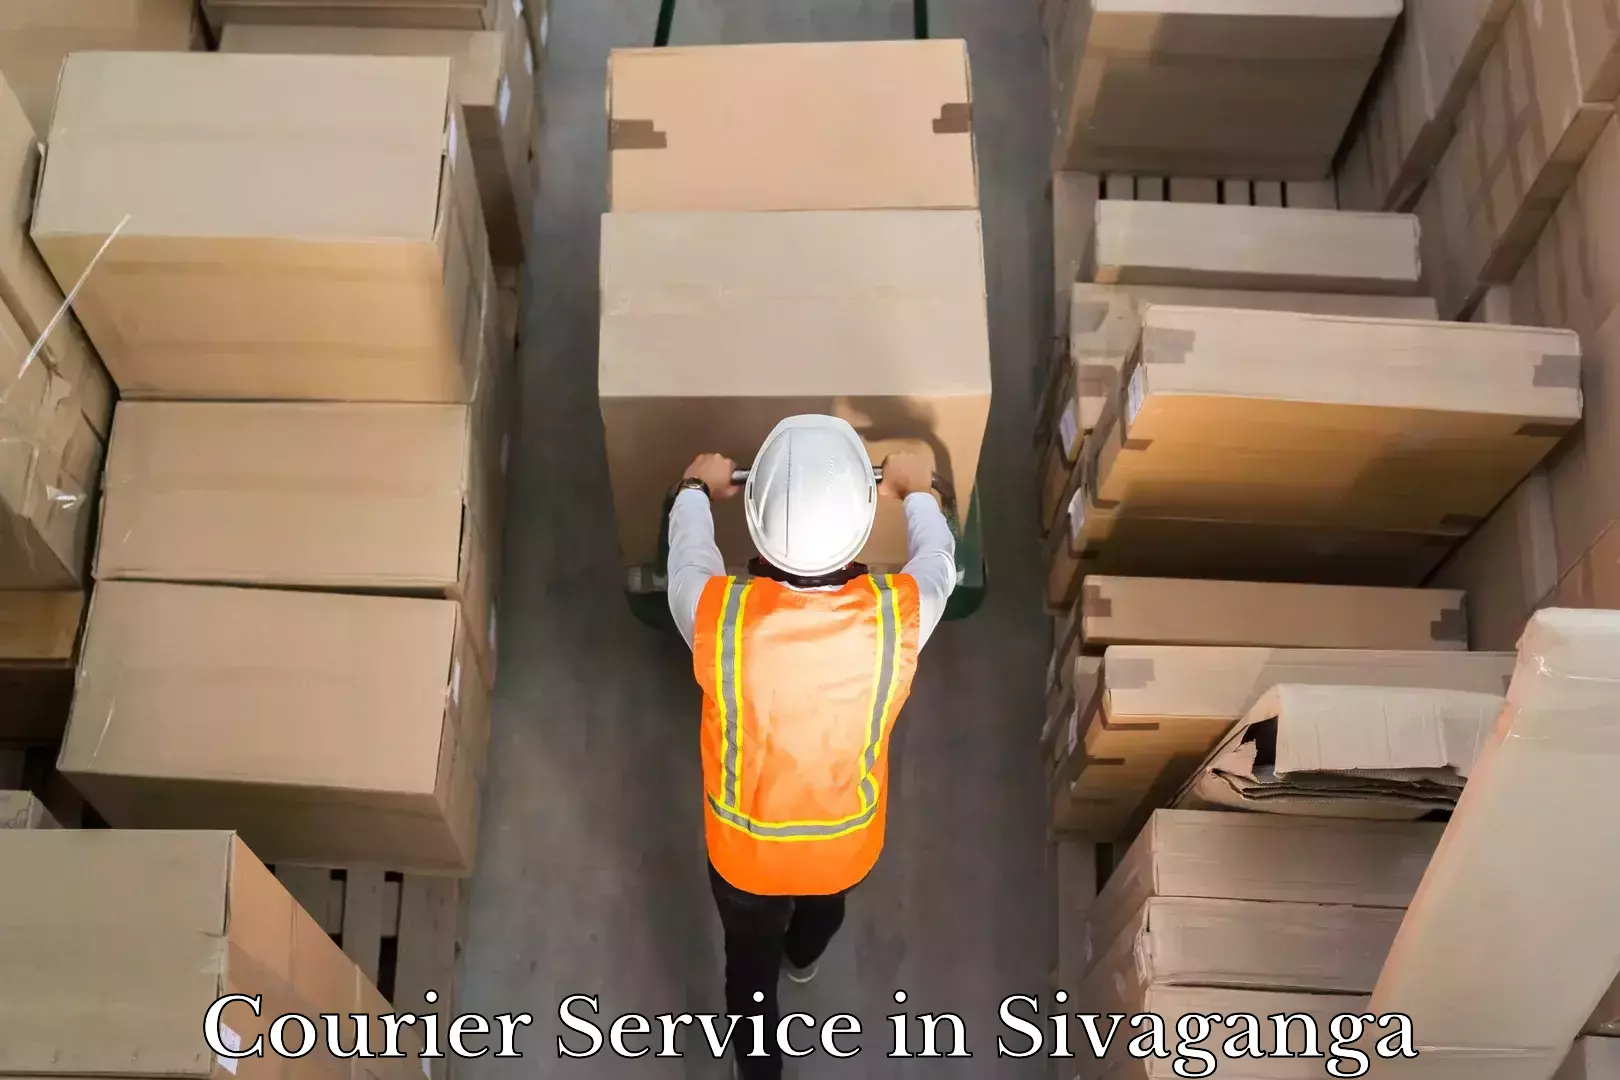 Express delivery capabilities in Sivaganga